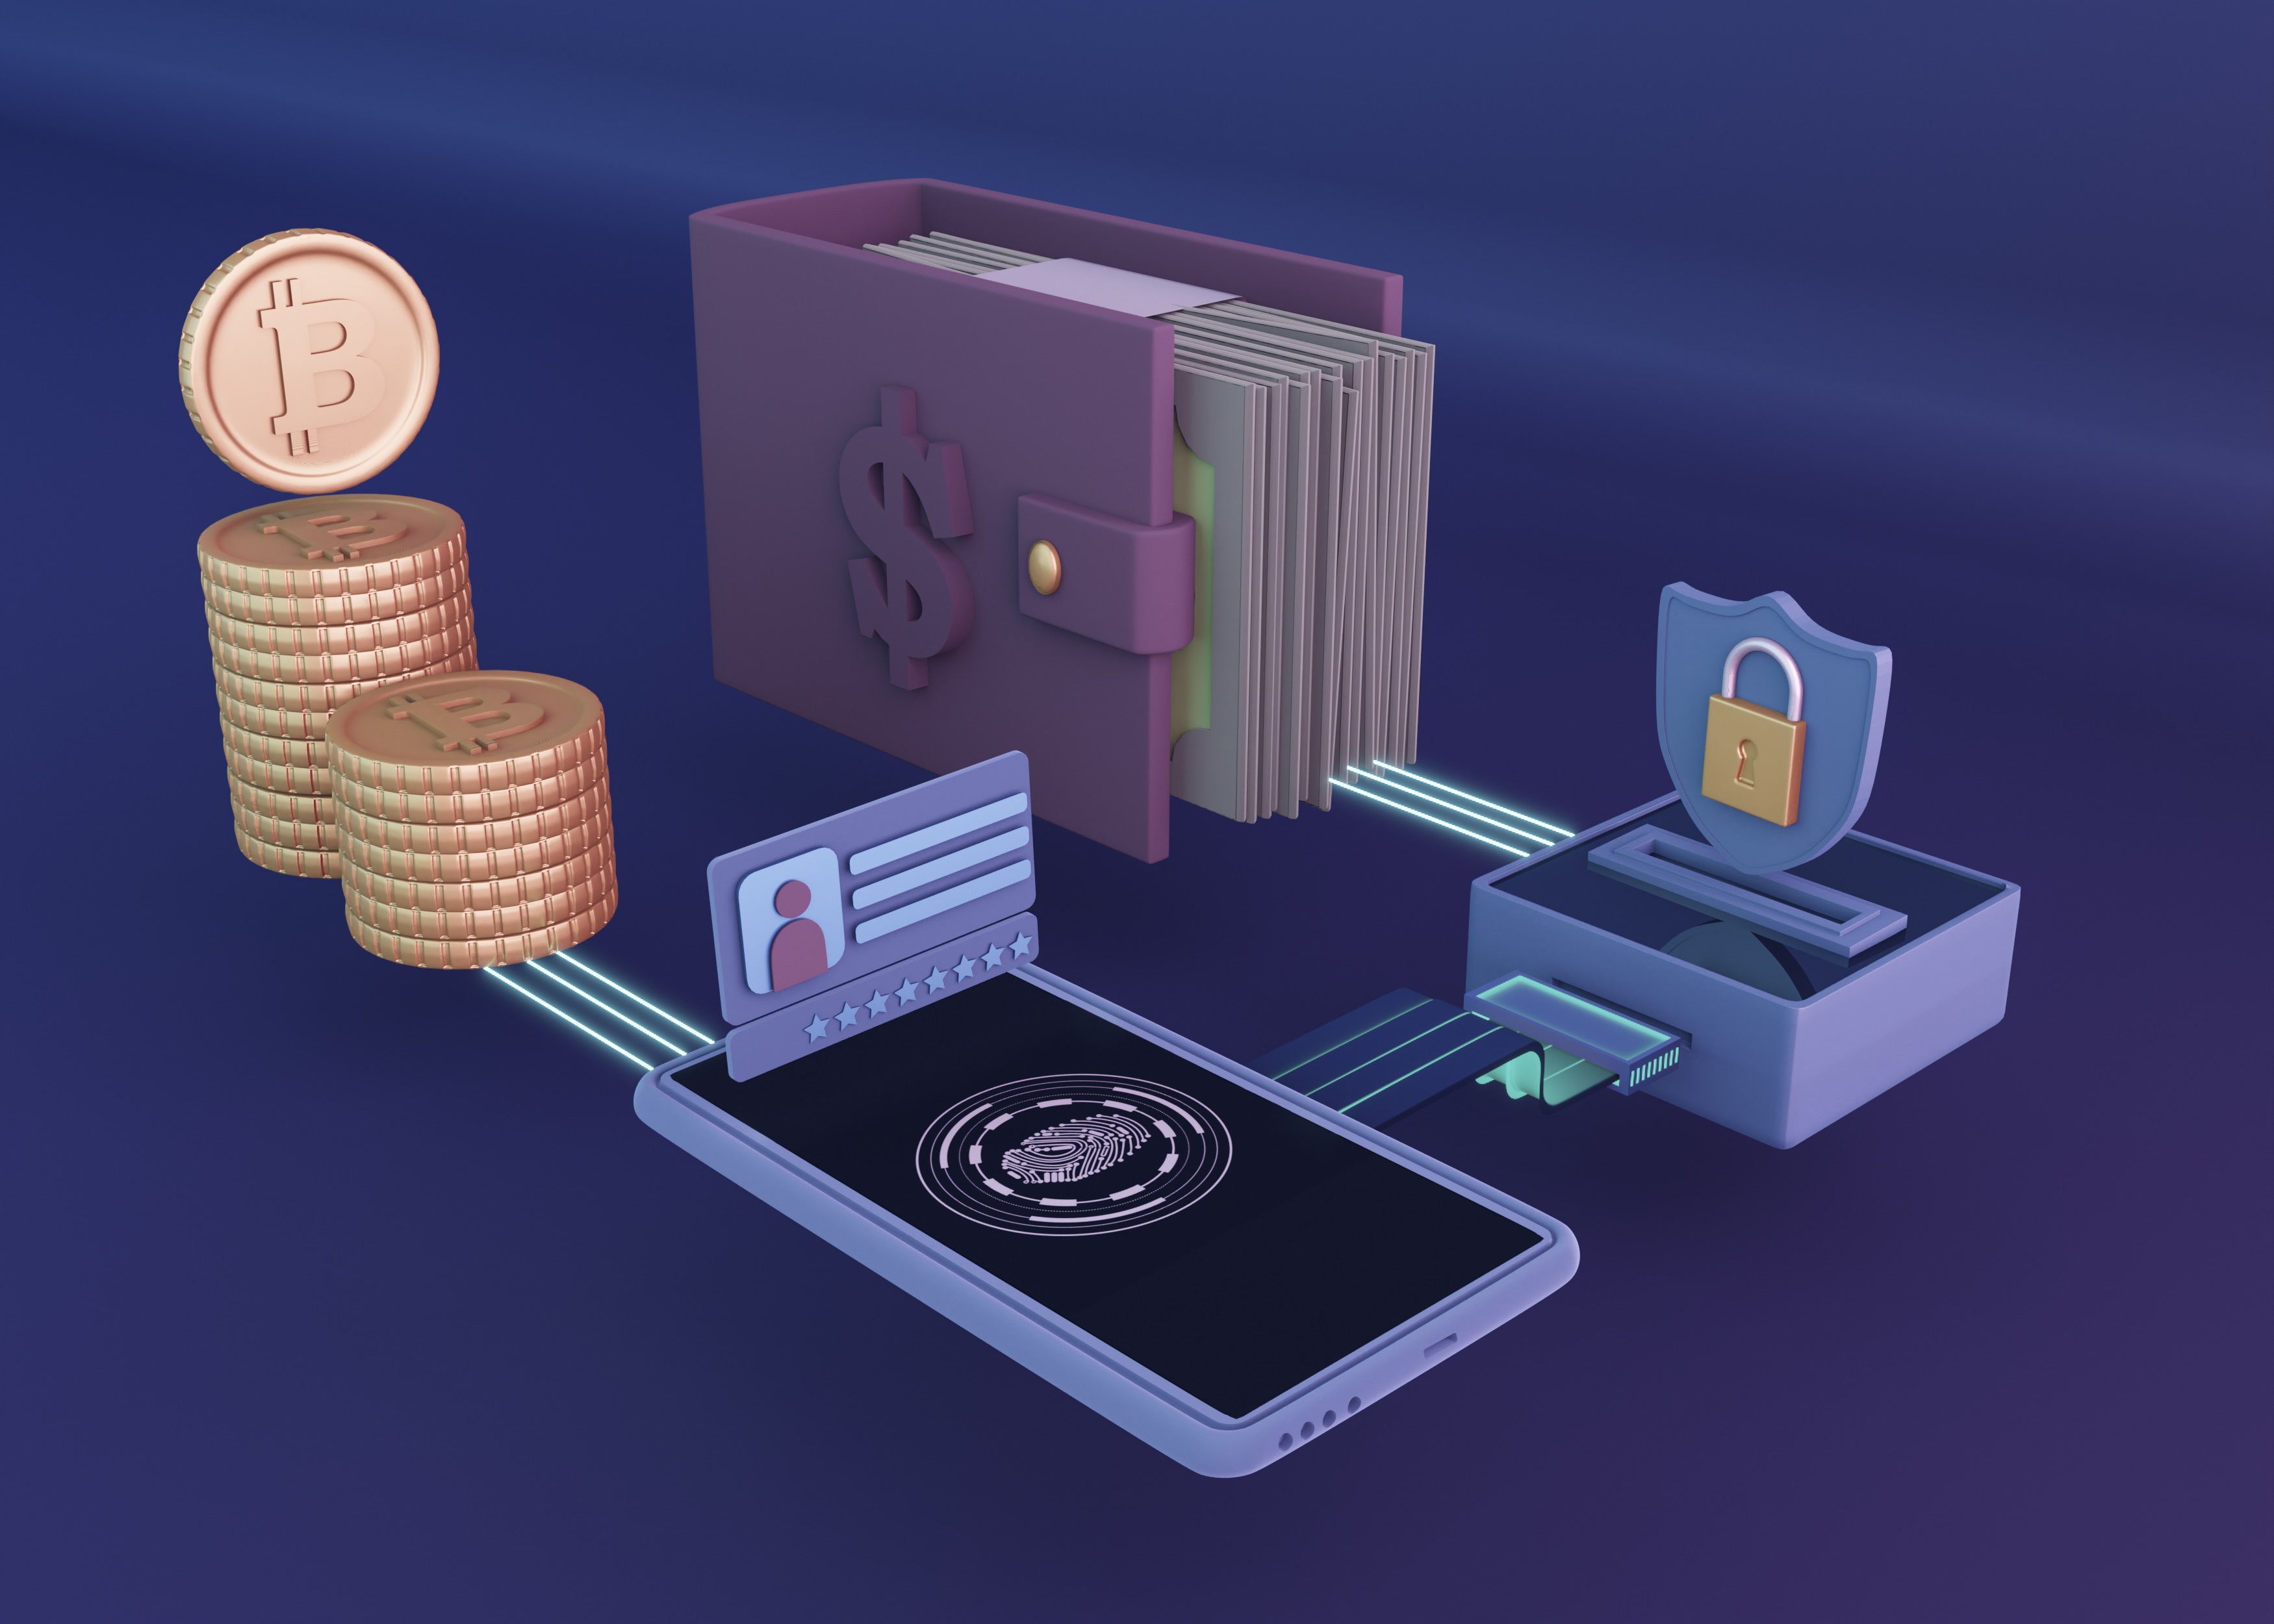 Fintech App Security Solutions - 8 Effective Ways to Protect Apps